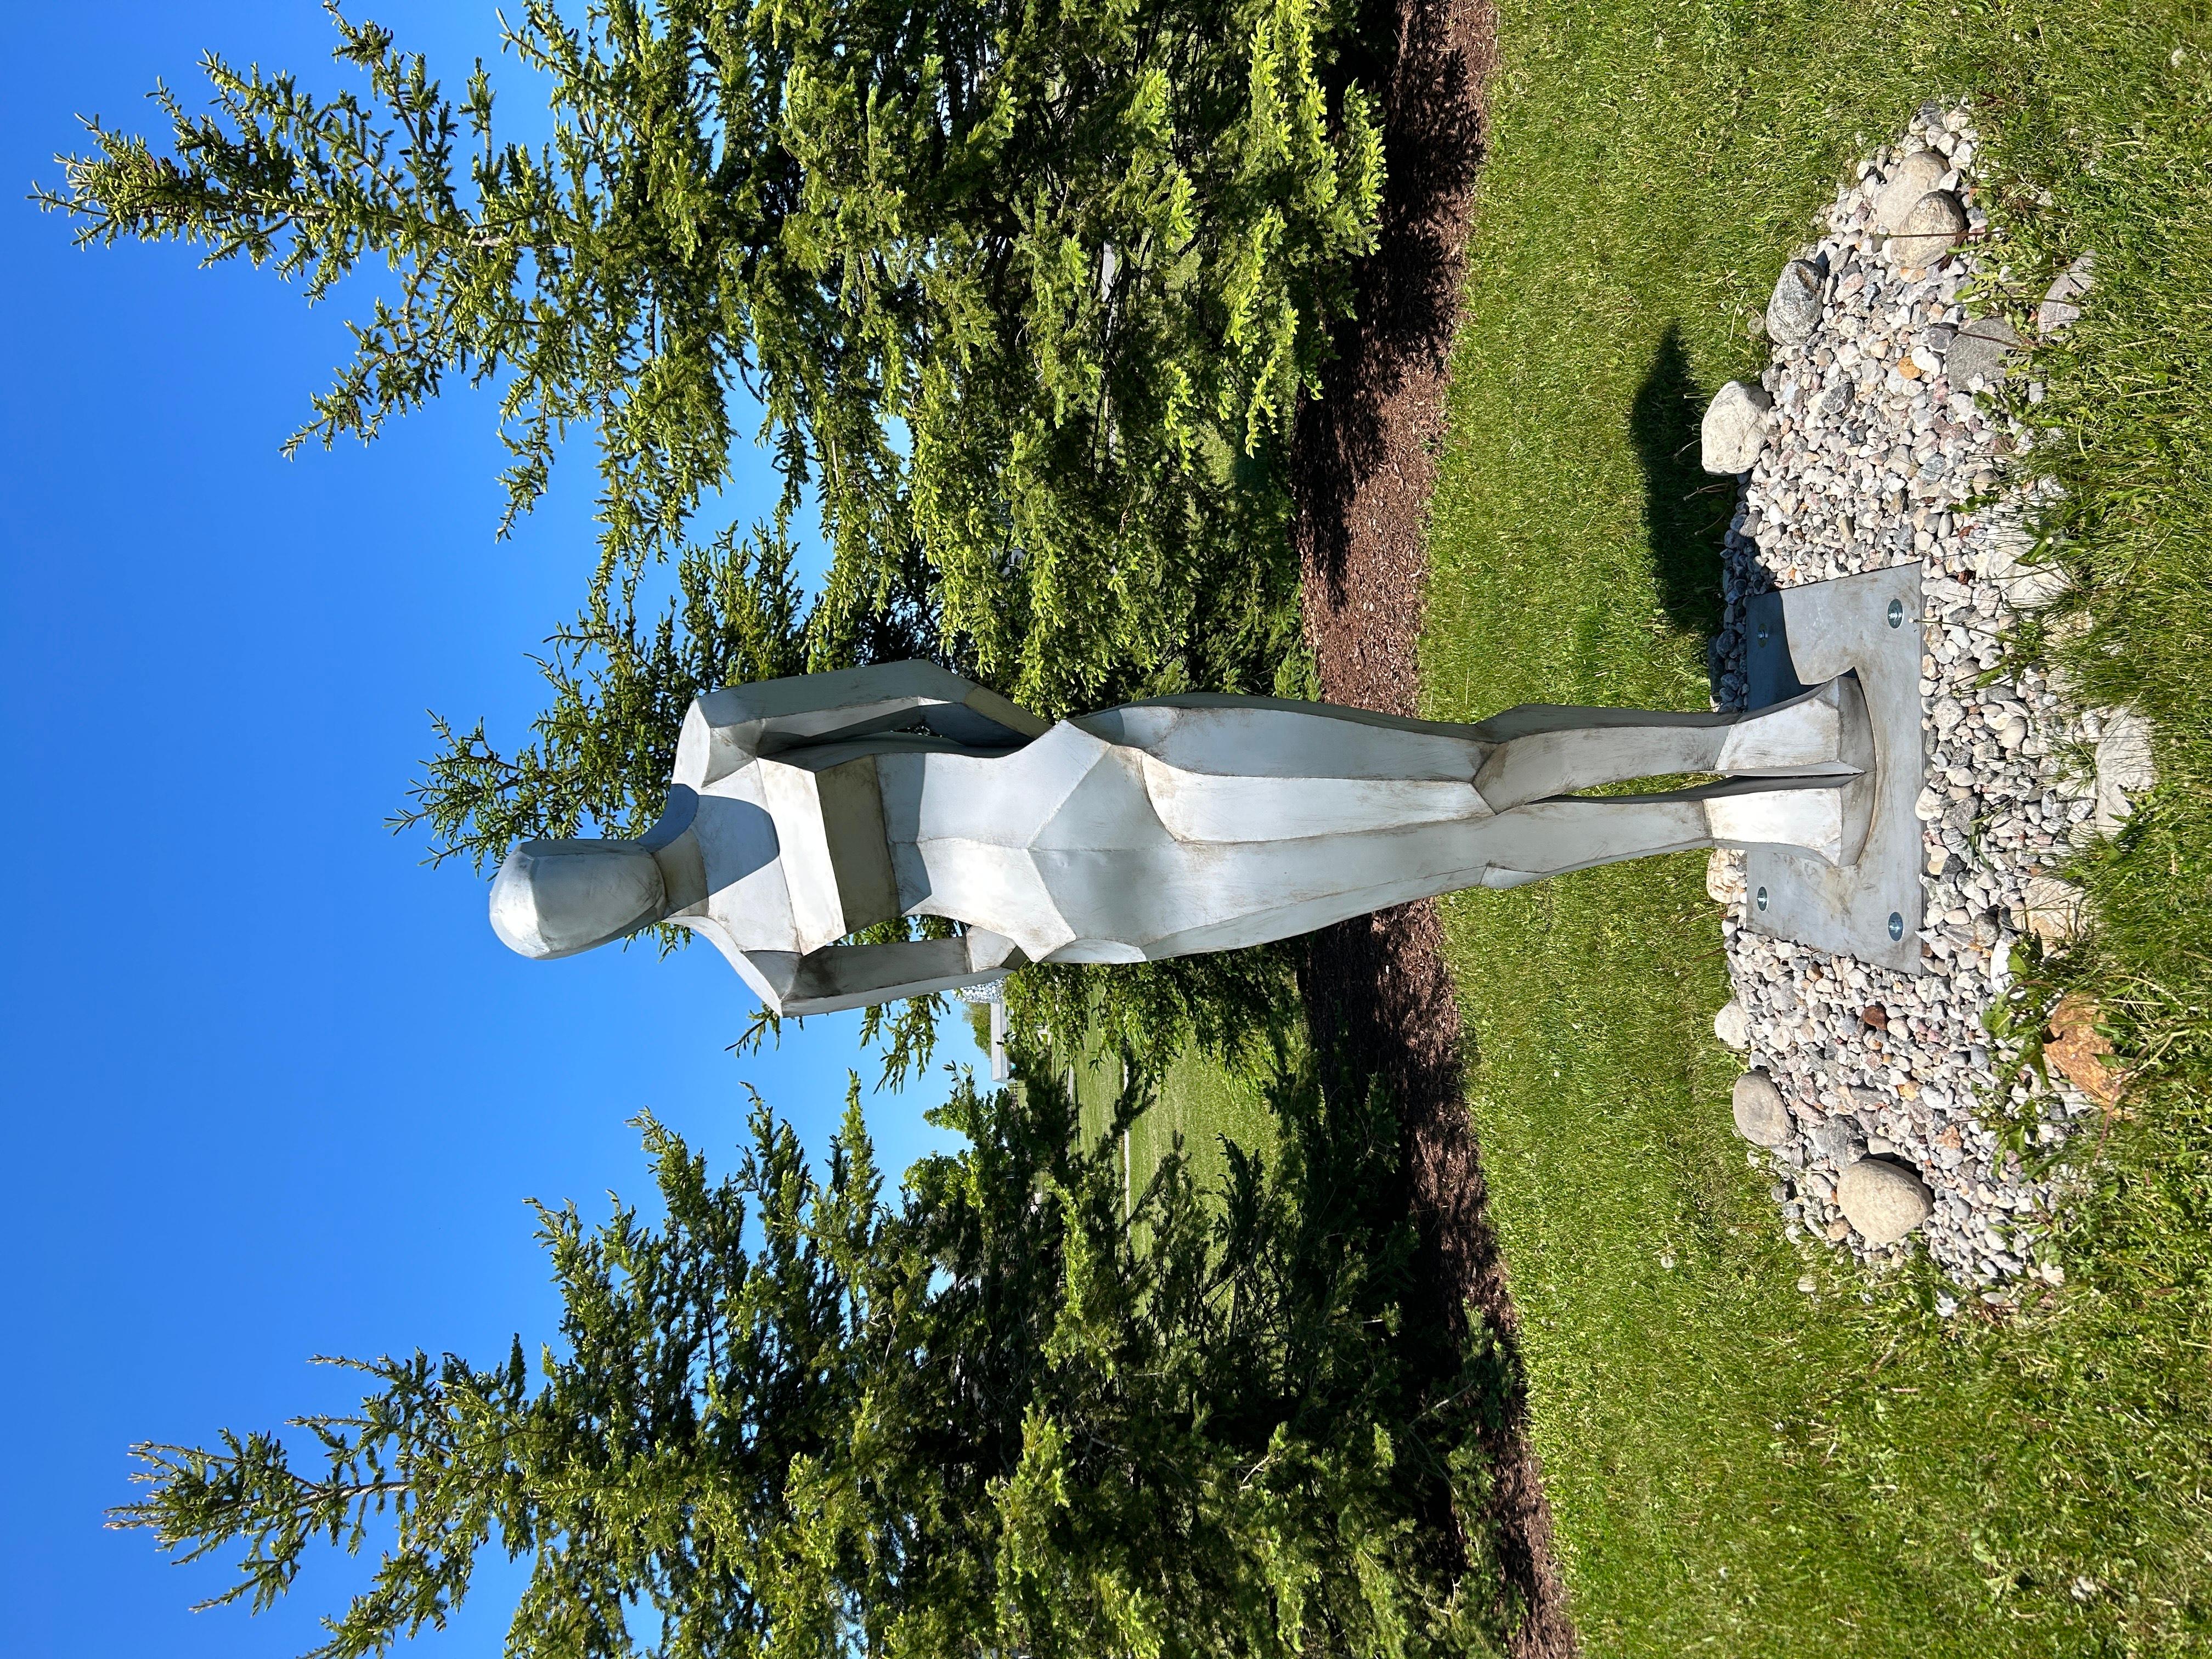 The Woman - tall, figurative, contemporary, stainless steel, outdoor sculpture 2